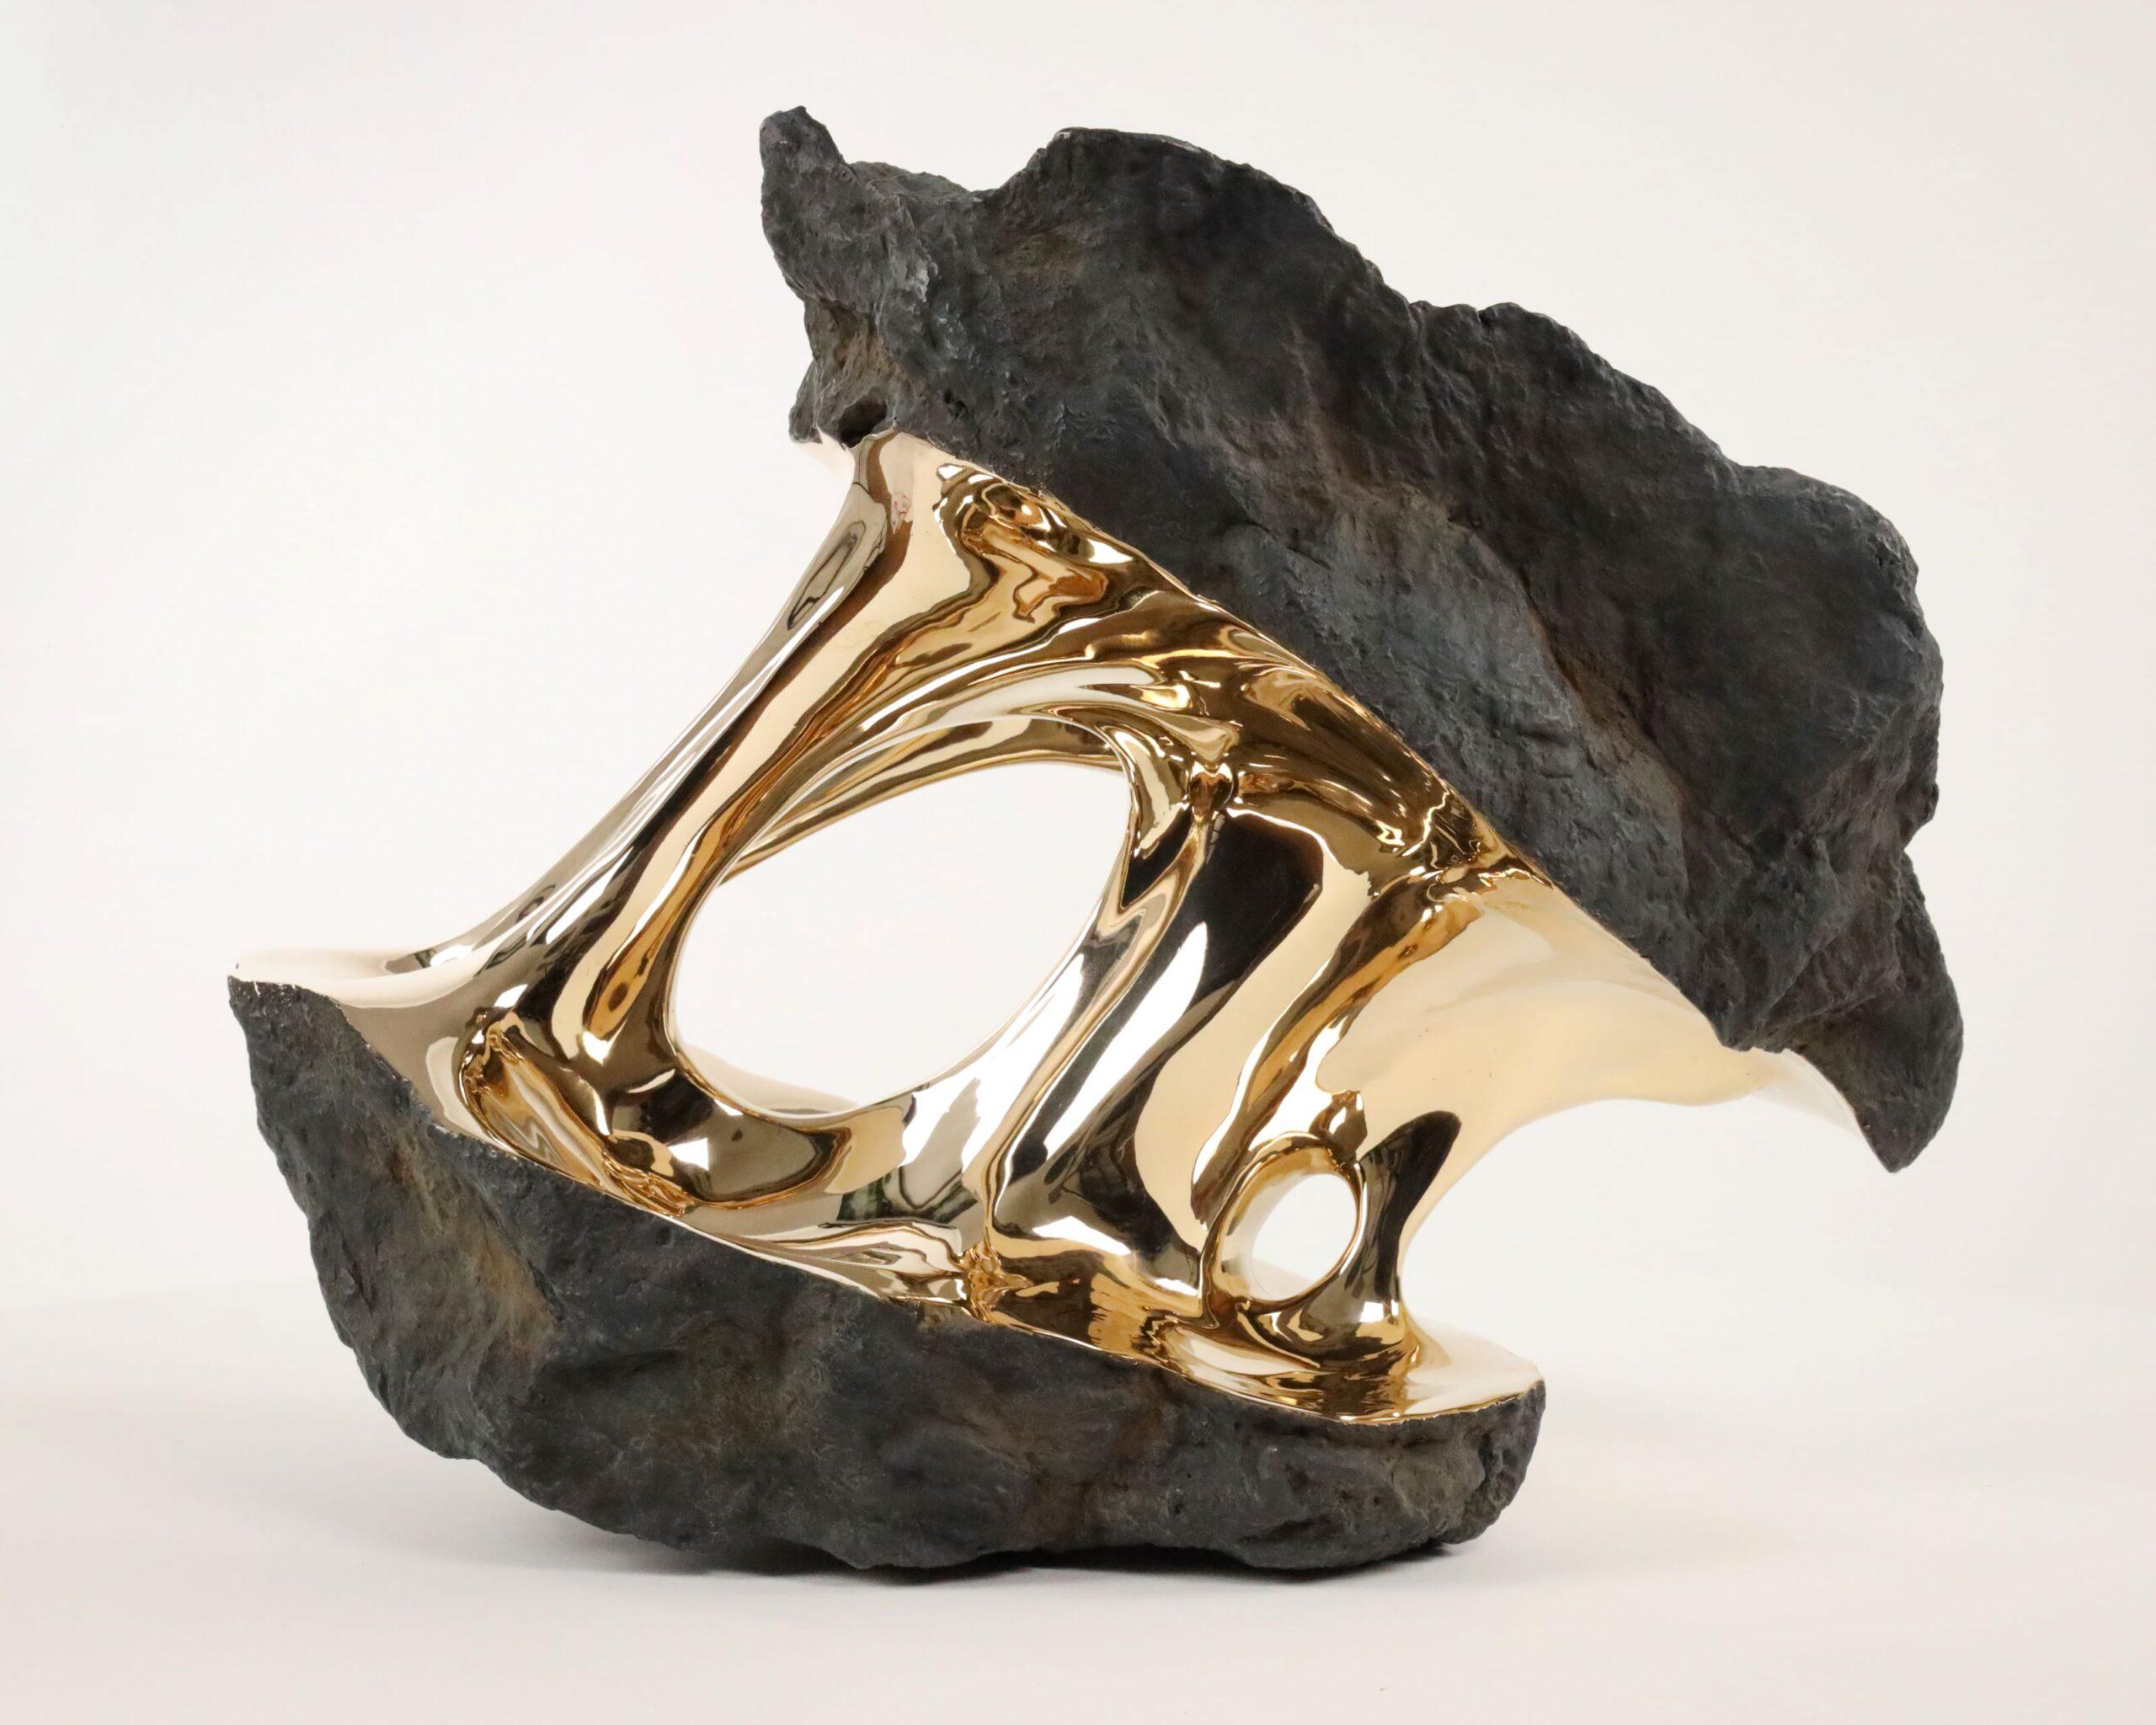 Alchemy by Romain Langlois - Rock-like bronze sculpture, golden, abstract For Sale 3